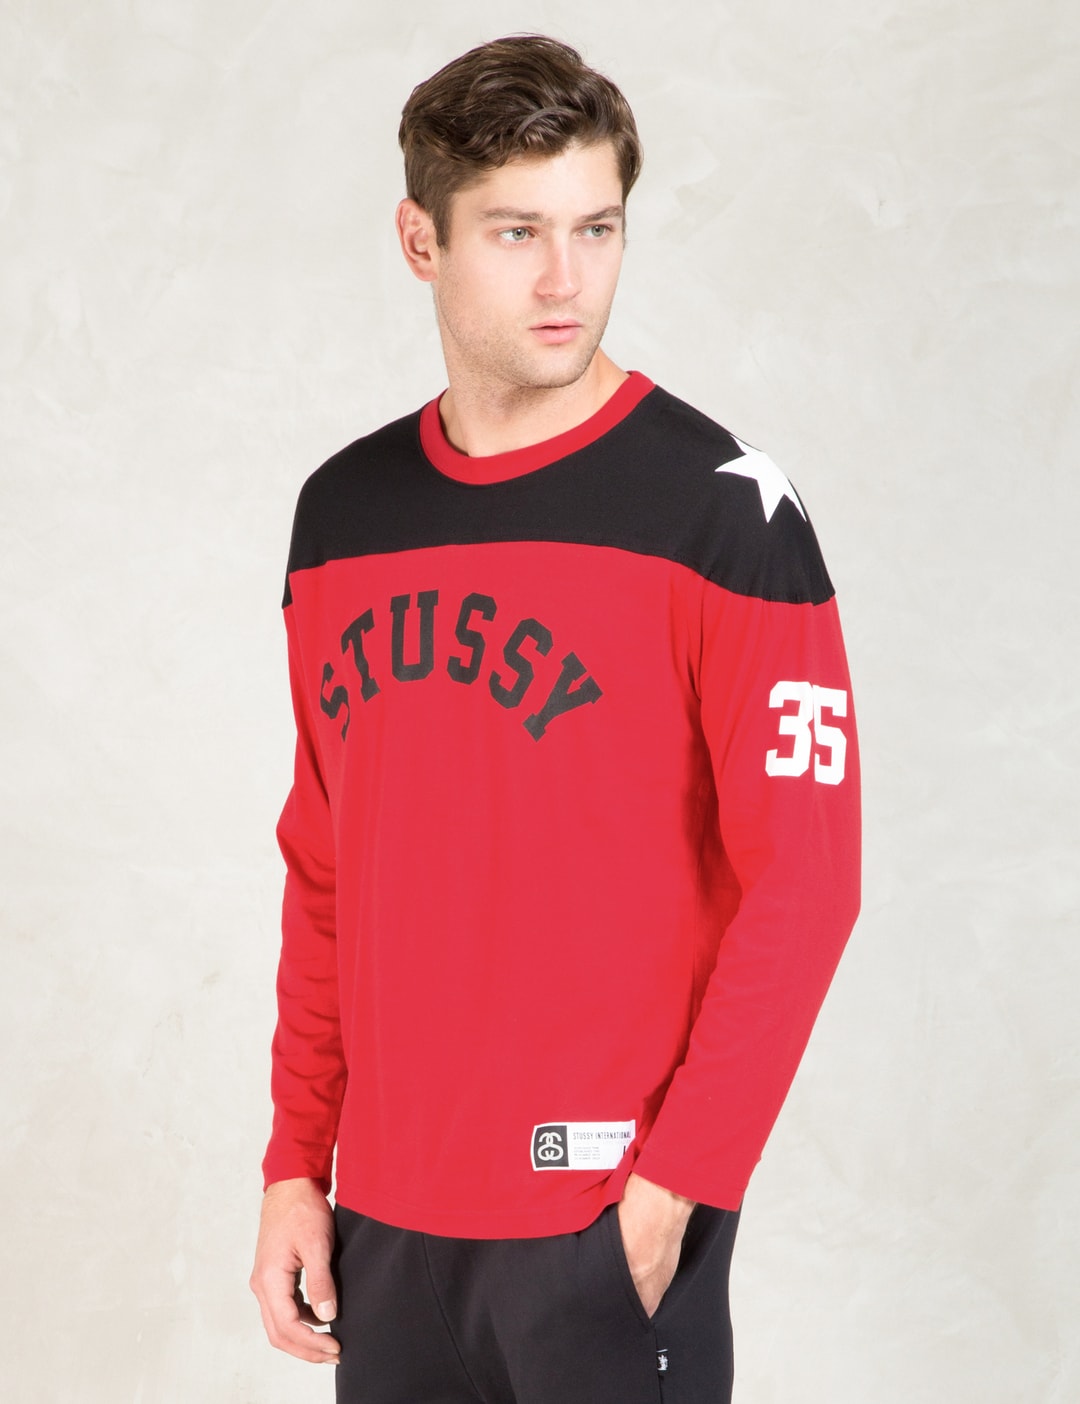 Stüssy - Red Star Hockey Jersey | HBX - Globally Curated Fashion and ...